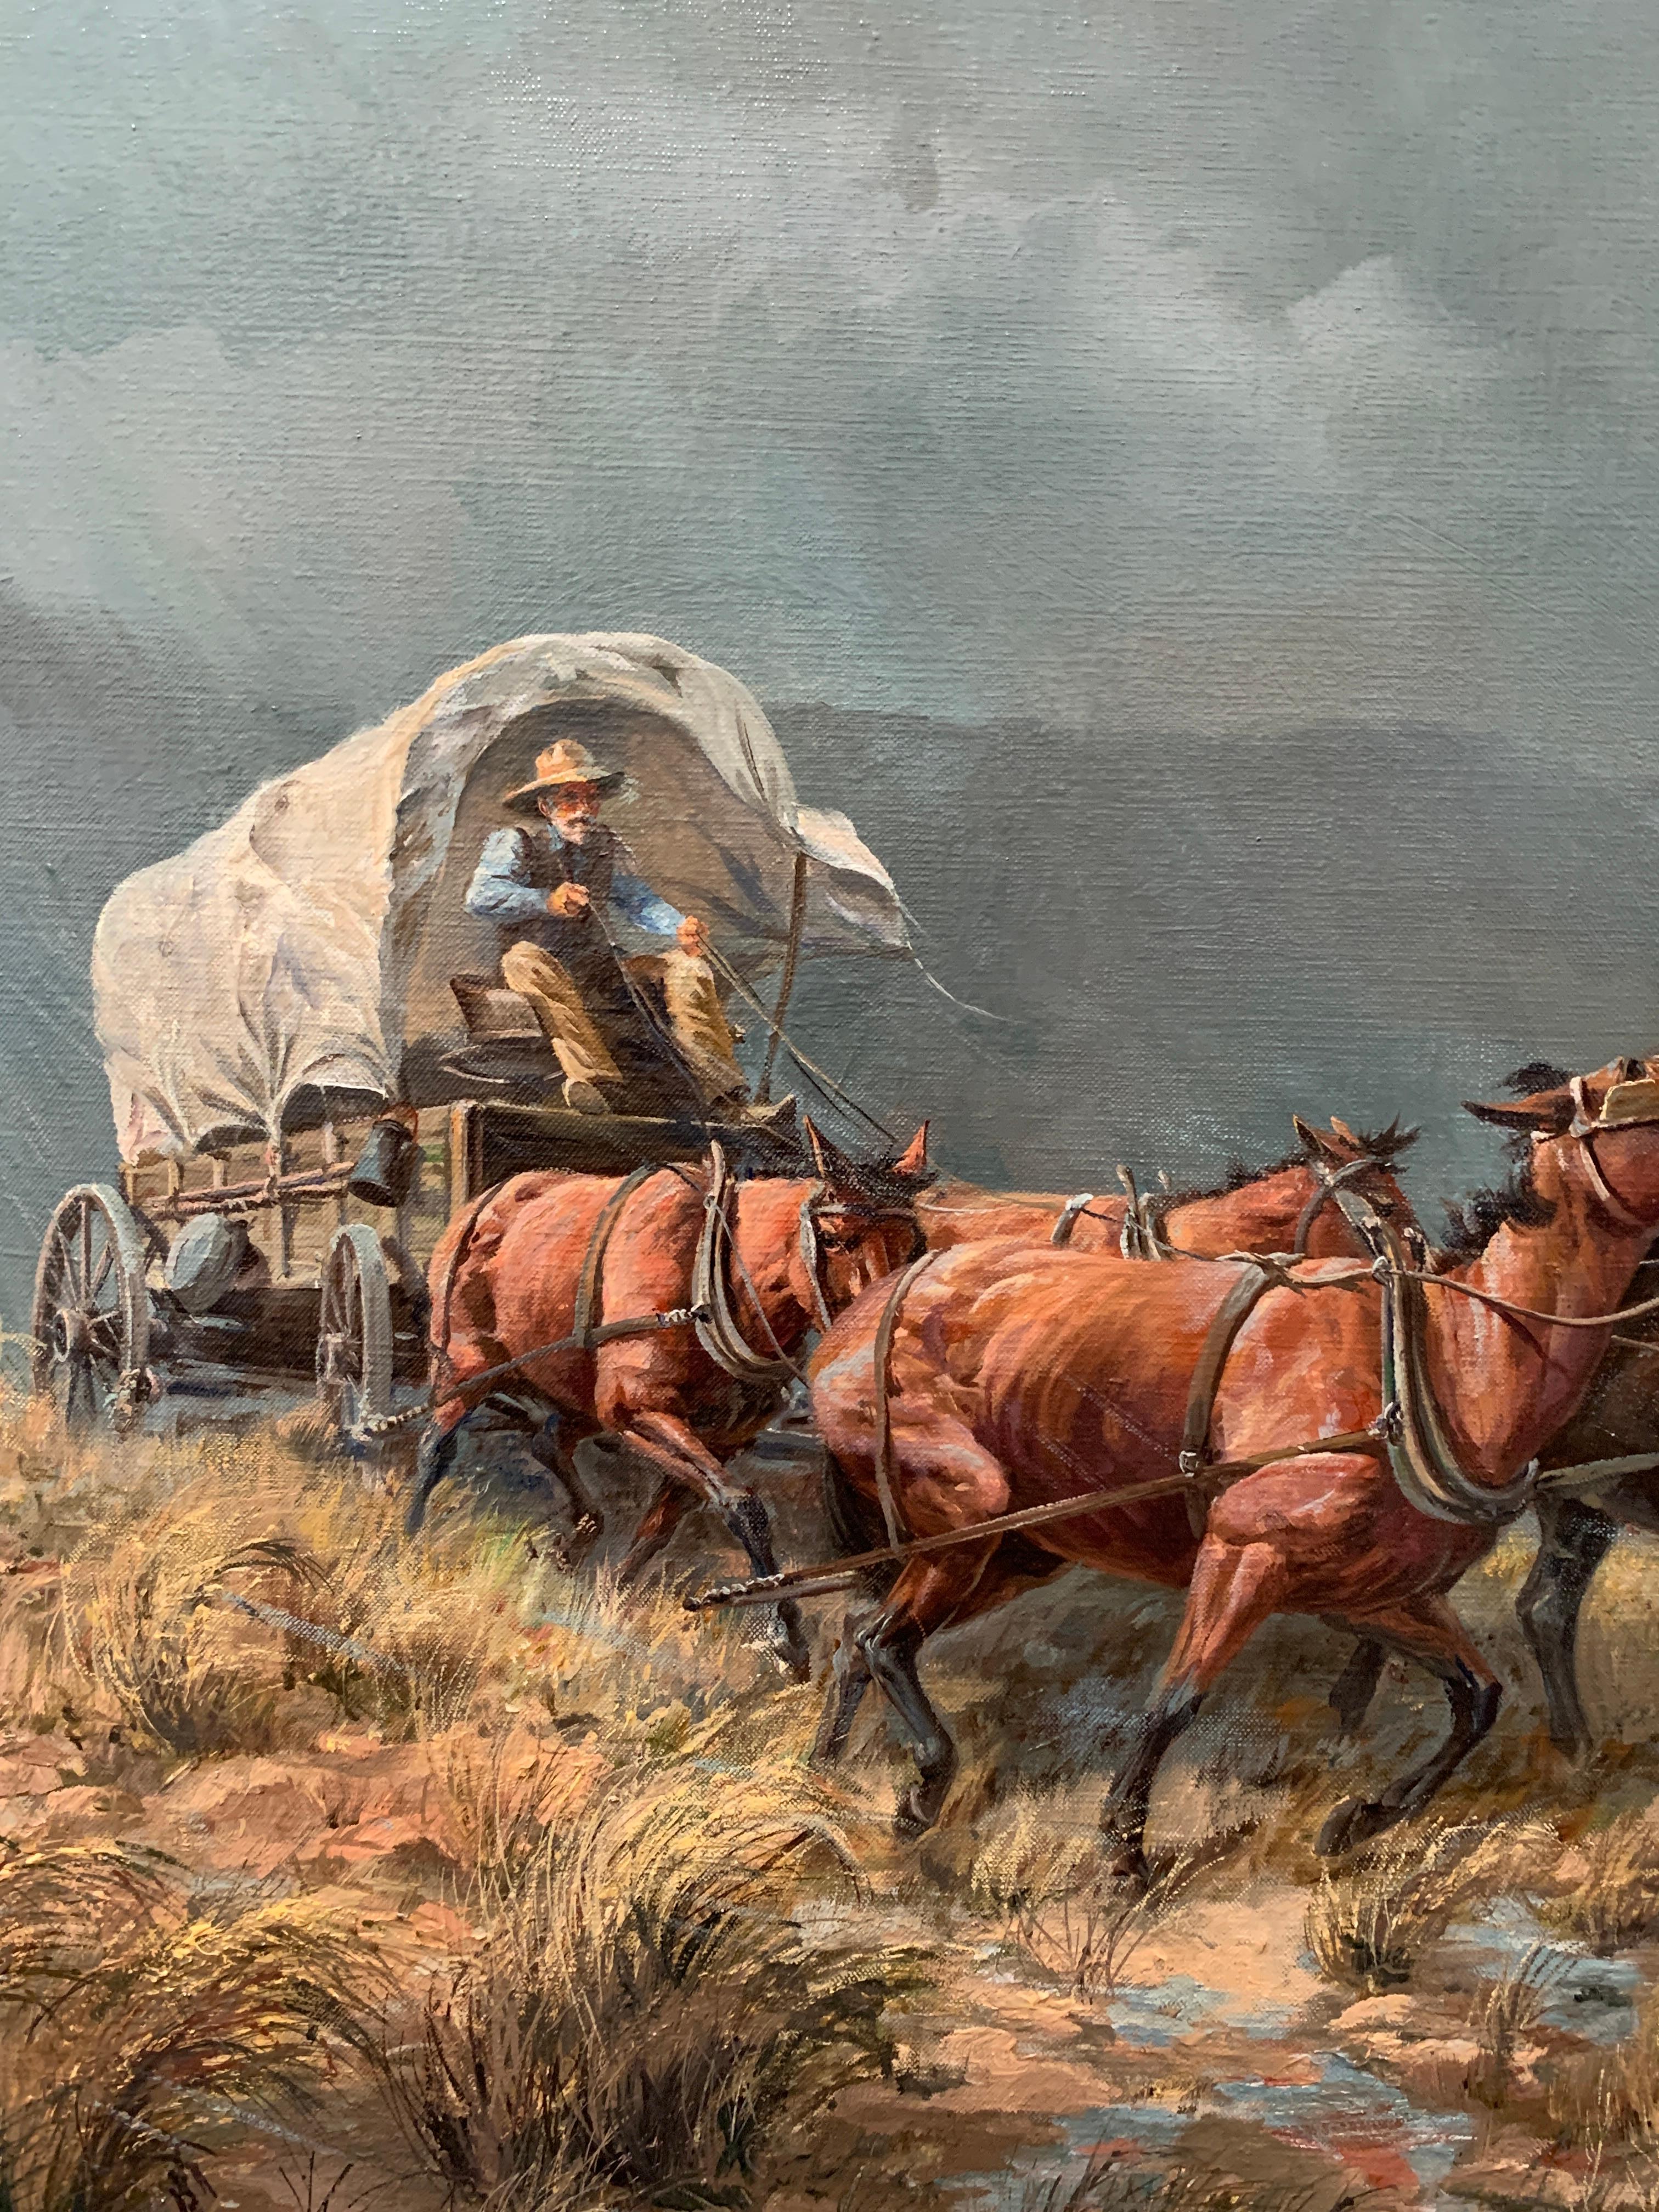 Cowboys trying to run out of the storm on this cold rainy day of cattle herding on the ranch. A cowboy in a wagon being pulled by four brown and black horses is herding the longhorns before they can sense the atmospheric pressure brought on by